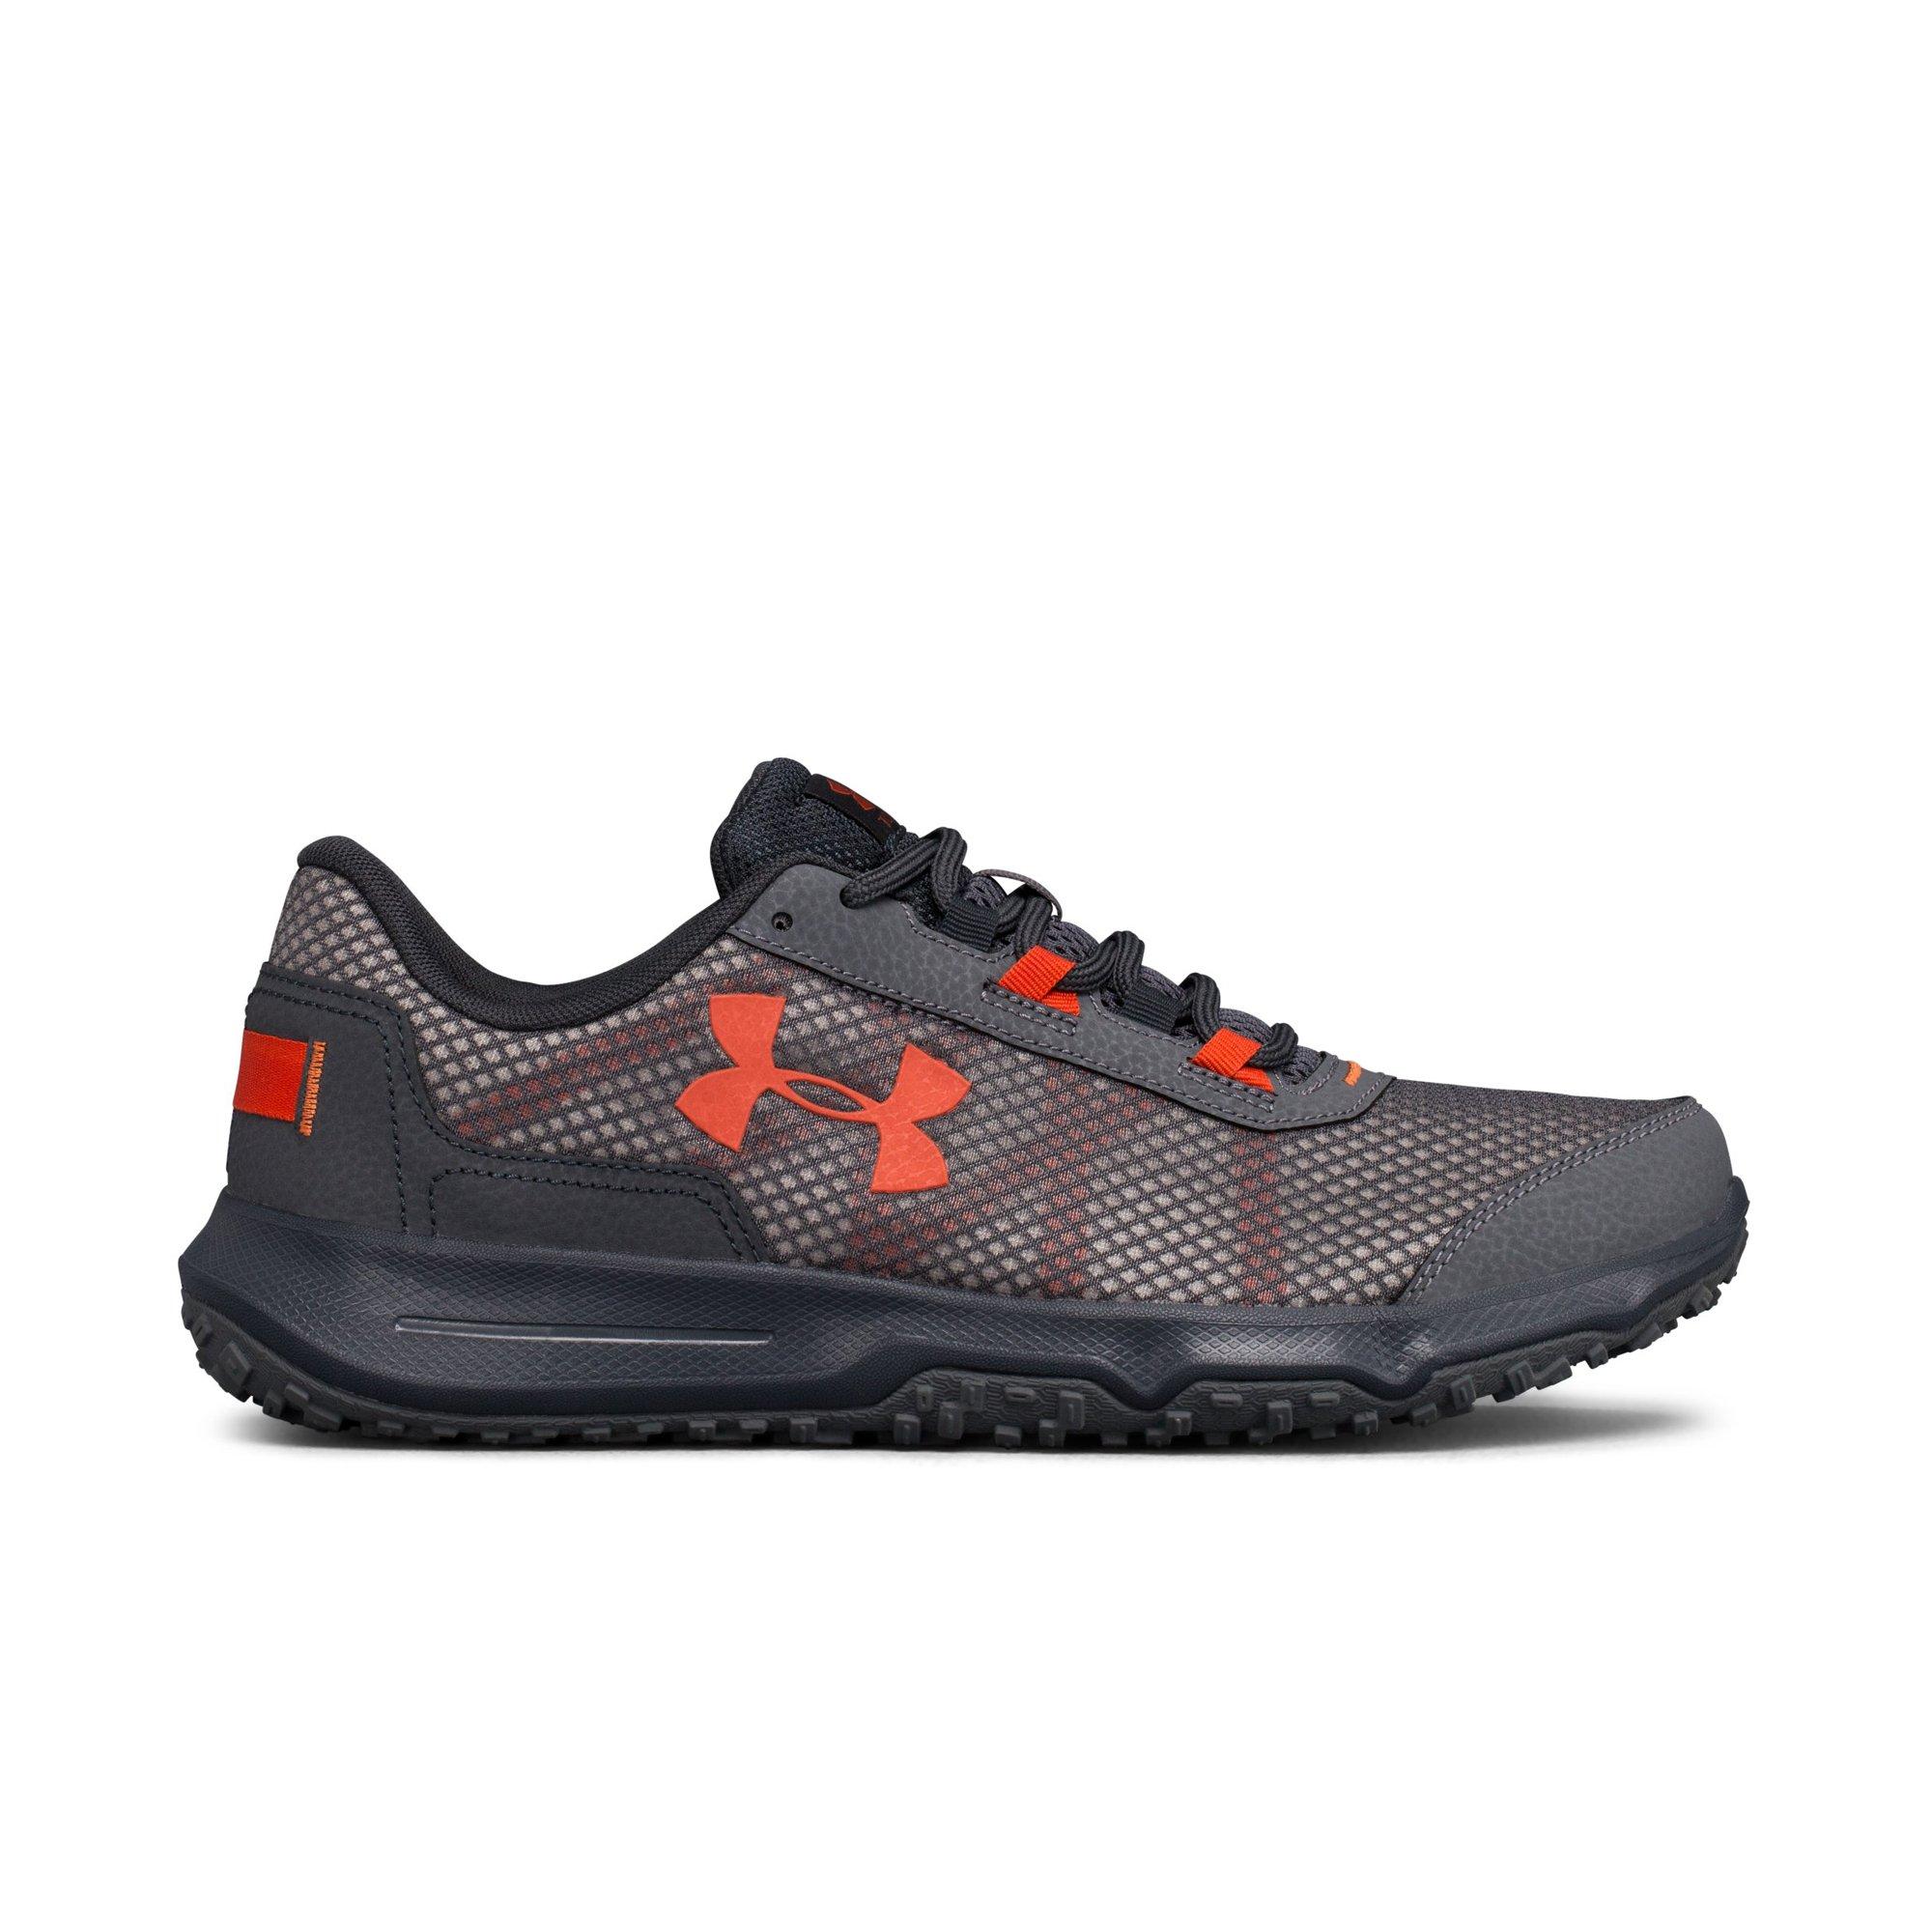 under armour toccoa men's running shoes review